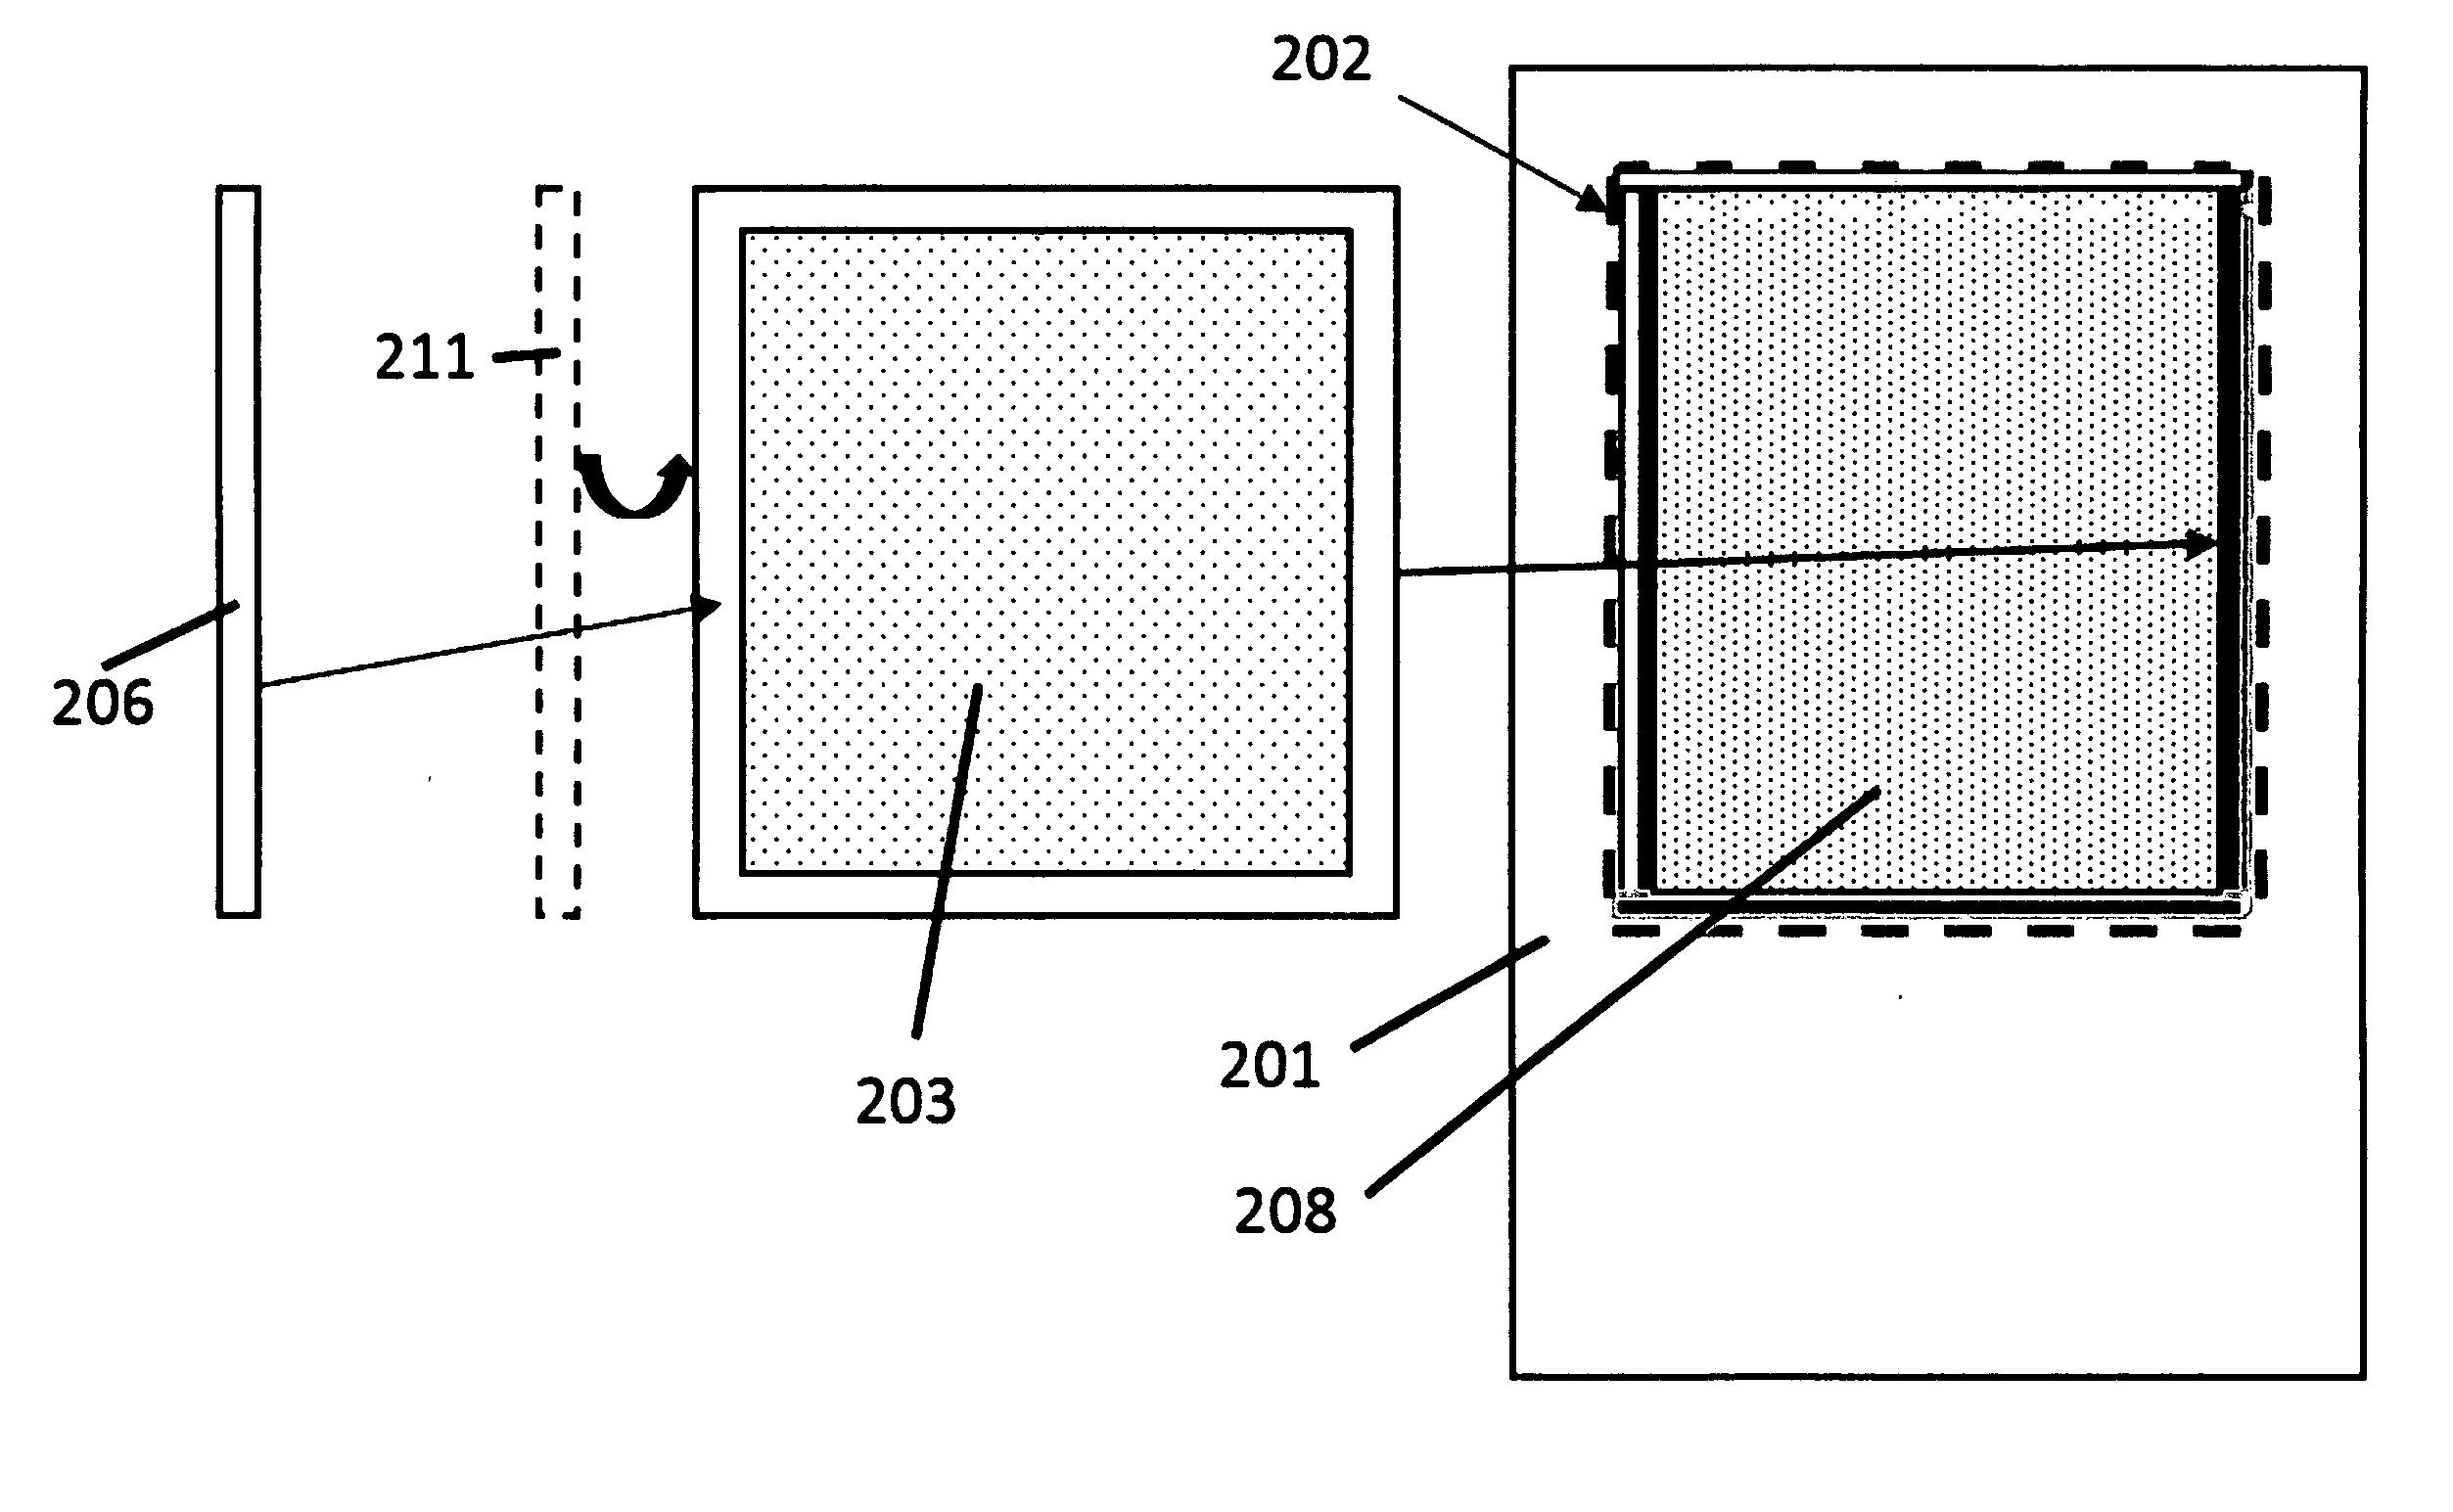 Protective Additional Glazing Systems, Apparatus, and Methods For Structural Openings